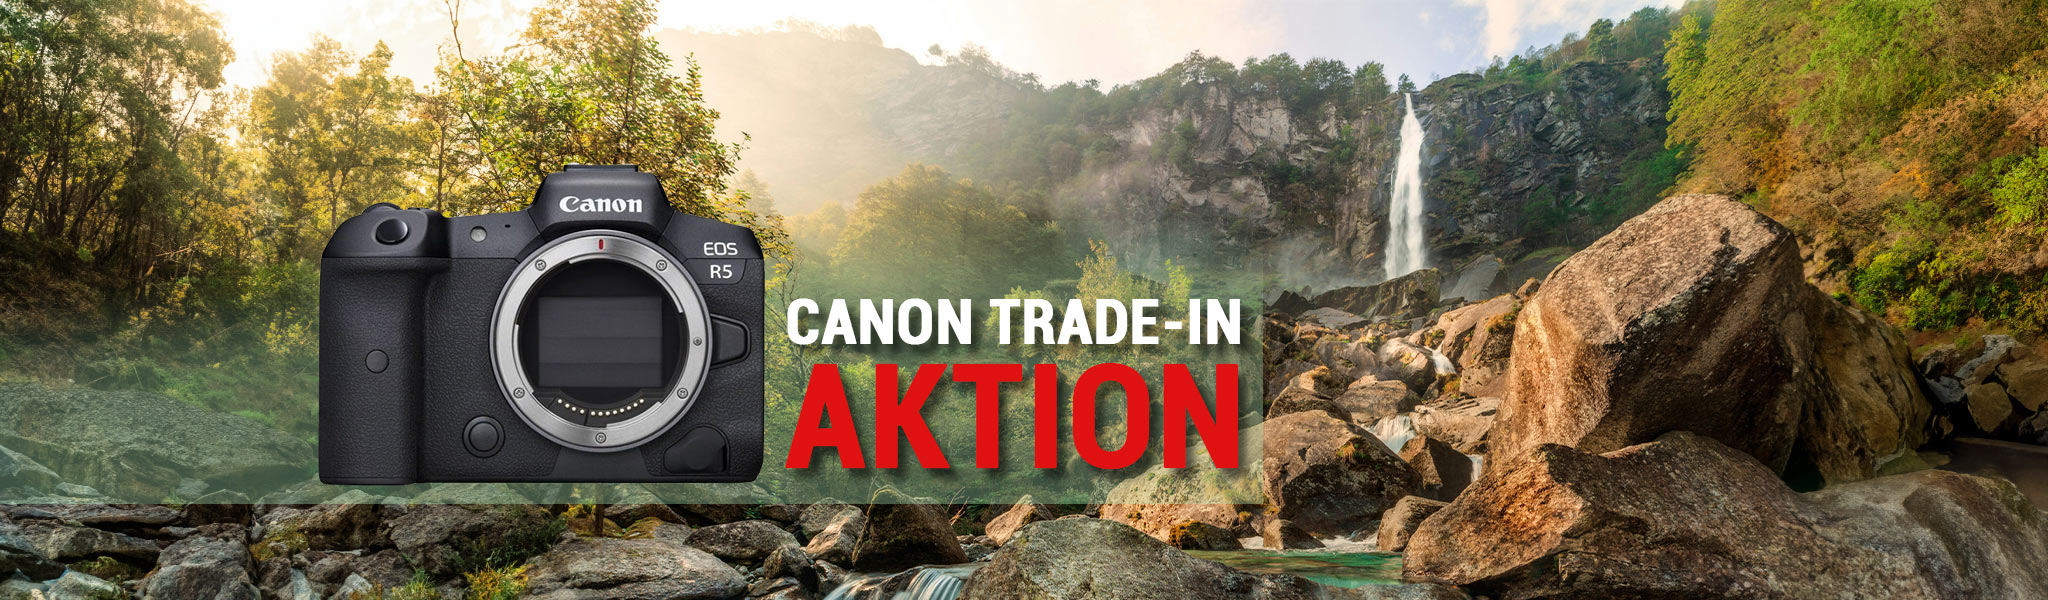 Canon Trade-In Aktion: 15.02.2024 - 31.03.2024 bei Fotomax in Nürnberg und Berlin.